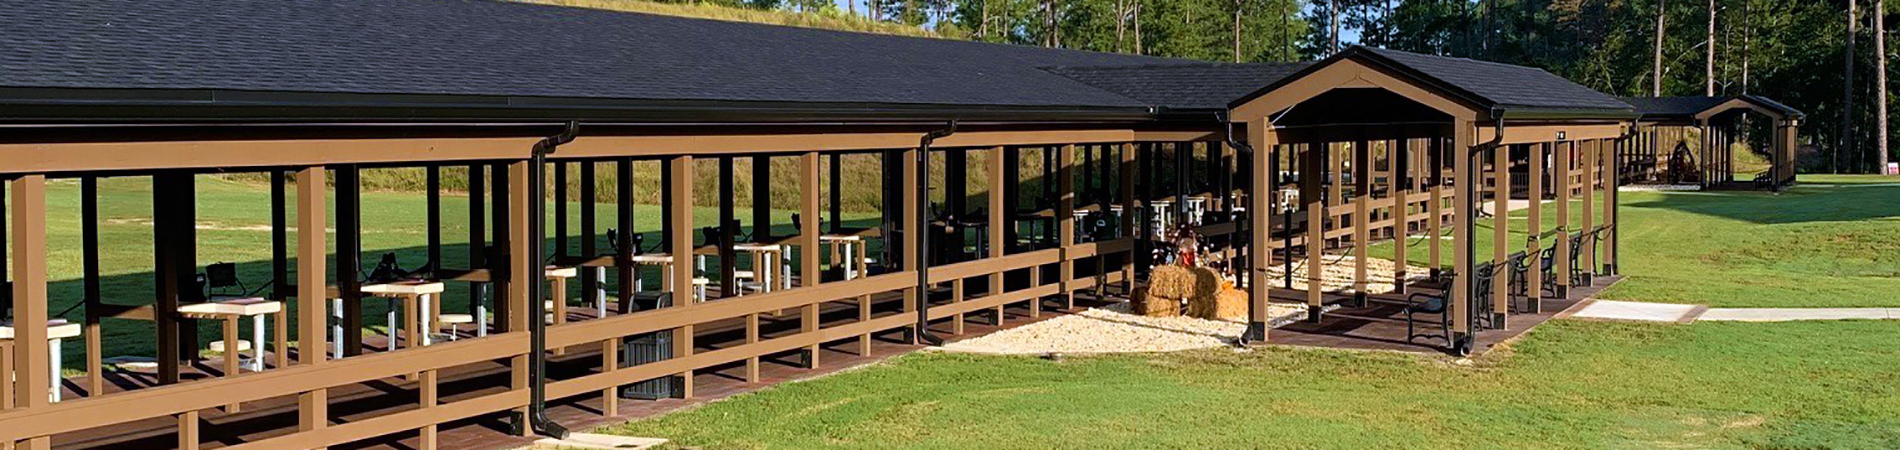 Outdoor Covered Range